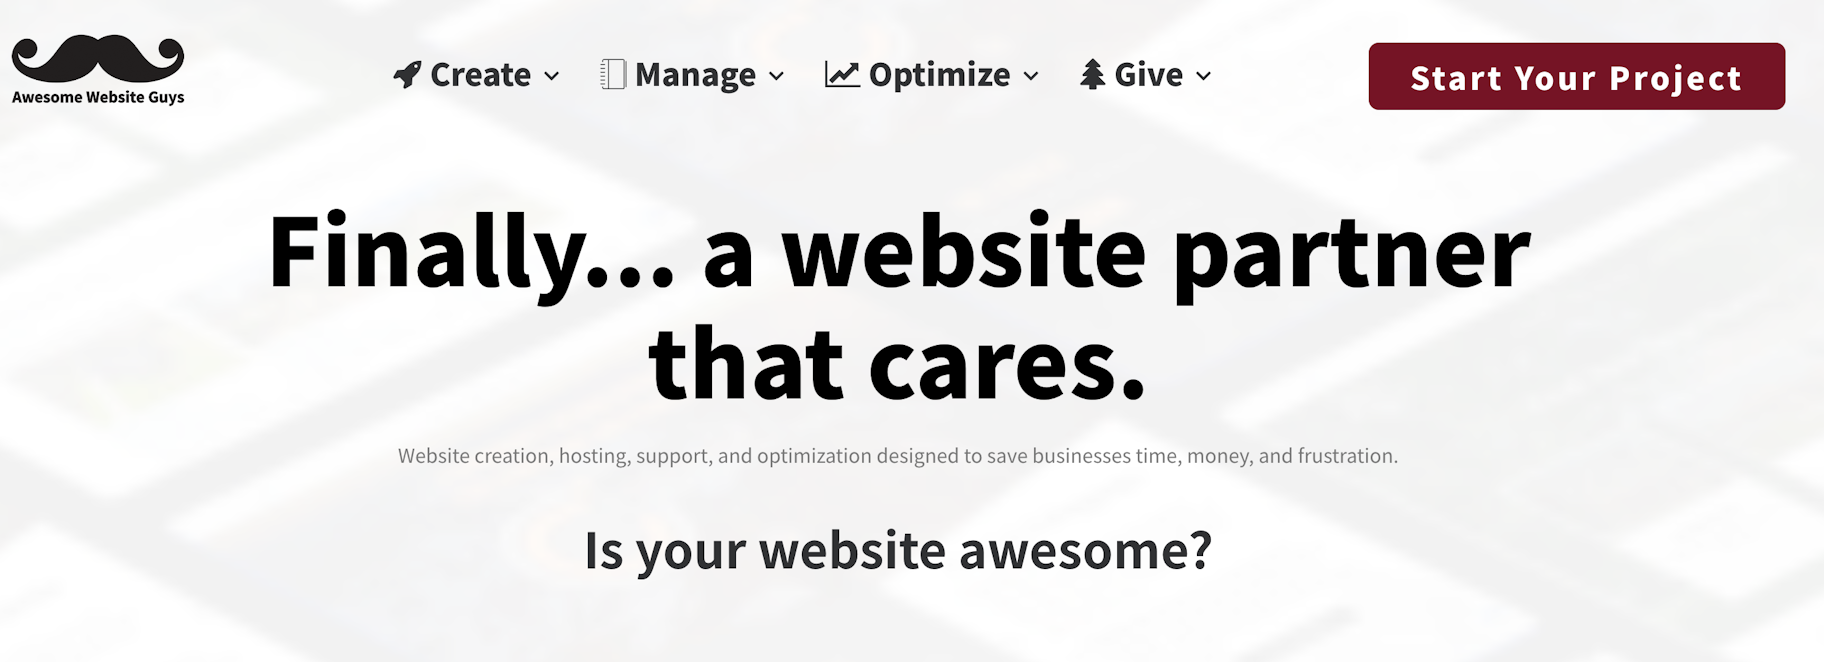 awesome website guys